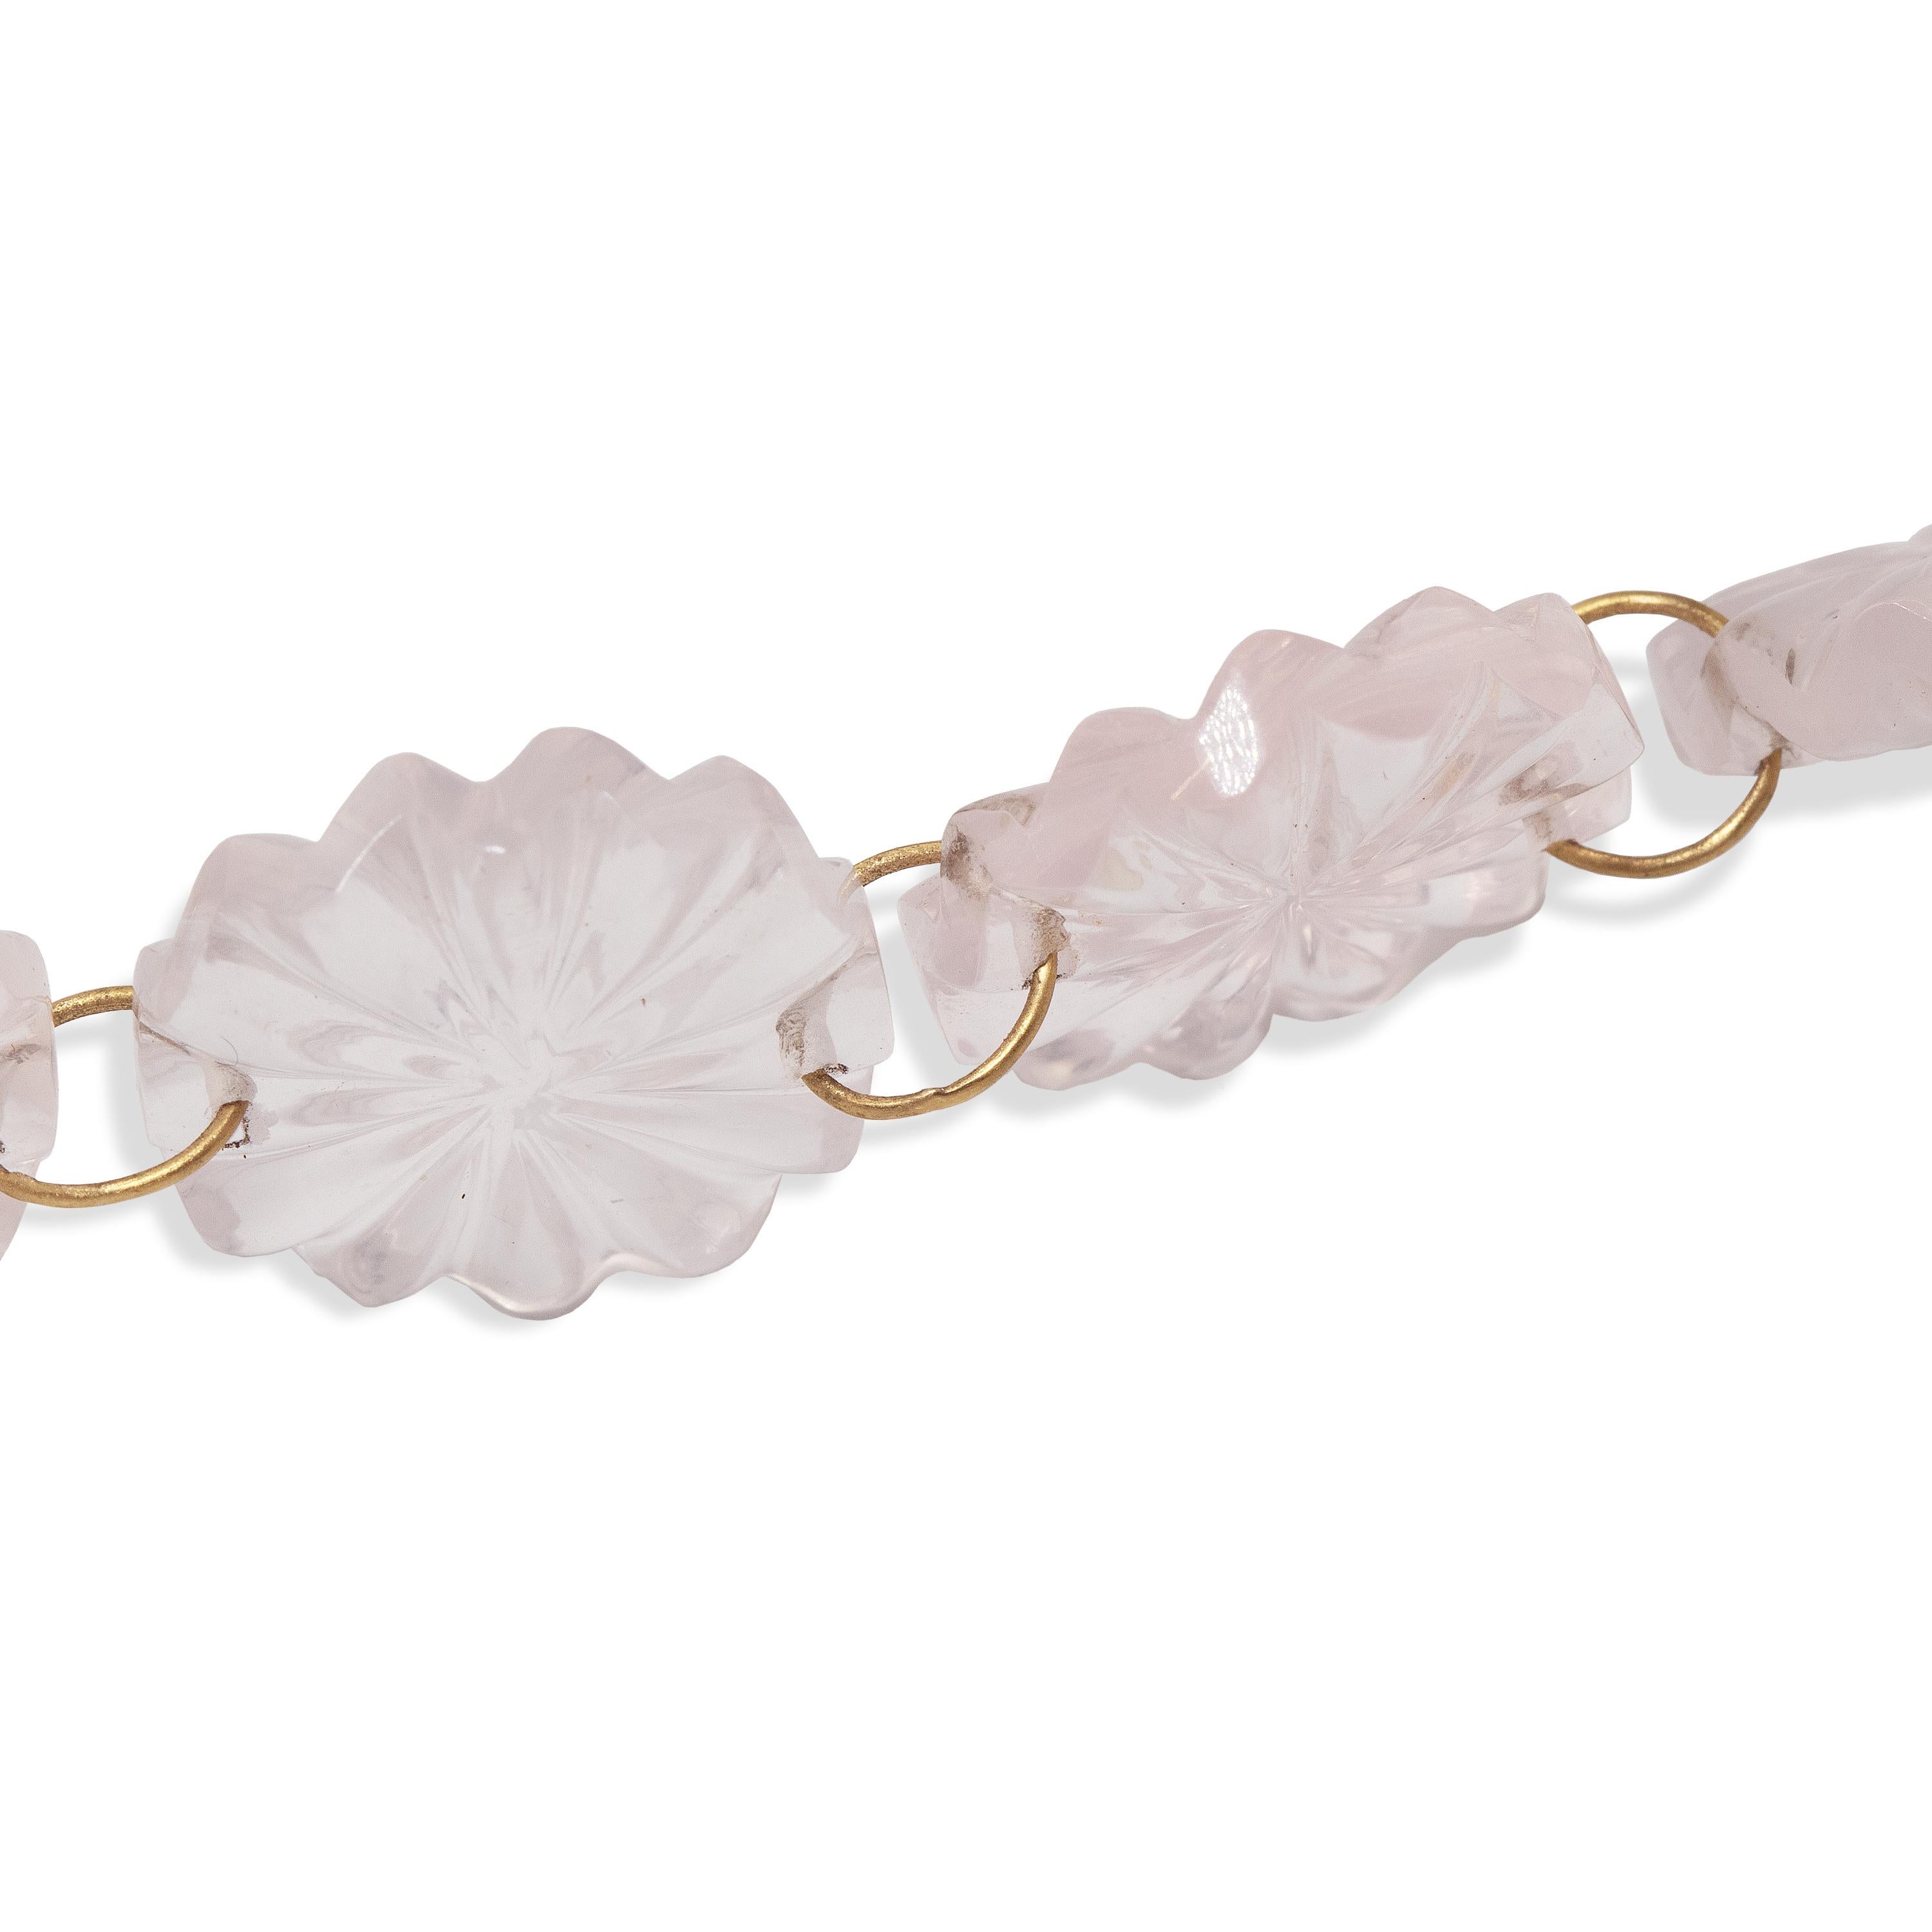 Artisan Ico & the Bird Fine Jewelry 240cts Rose Quartz Carved 22k Gold Necklace For Sale